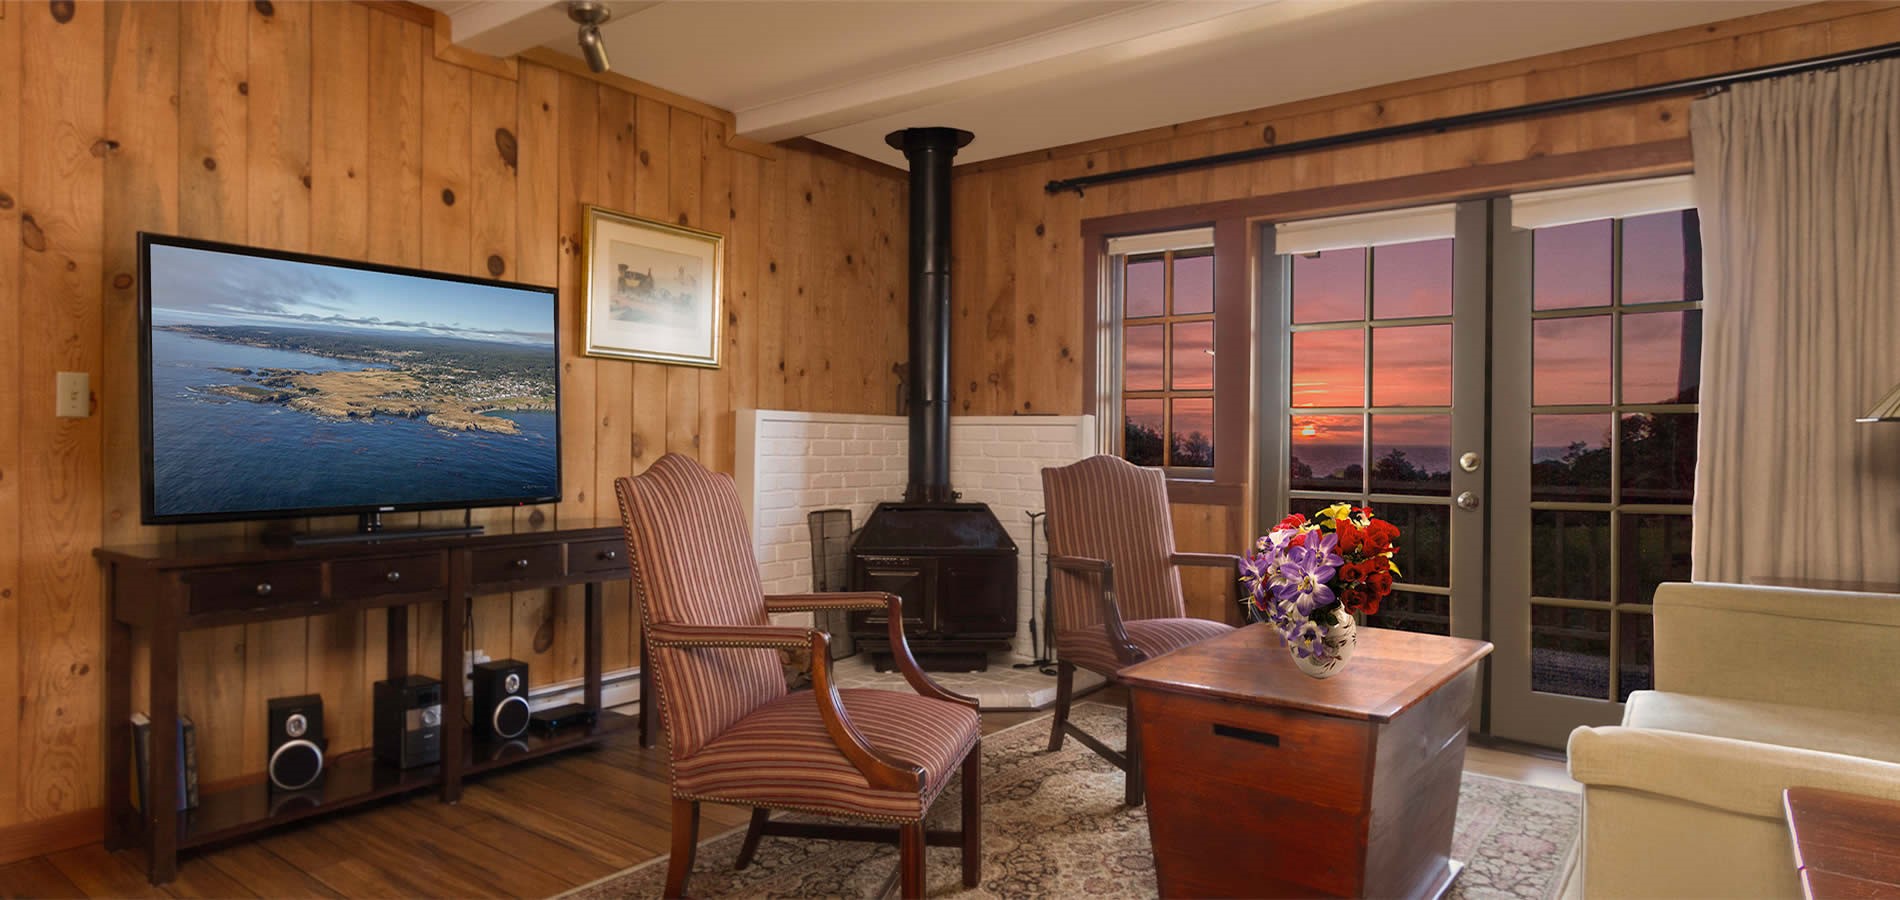 mendocino hotel stanford inn guest room with tv, chairs and sunset over the ocean